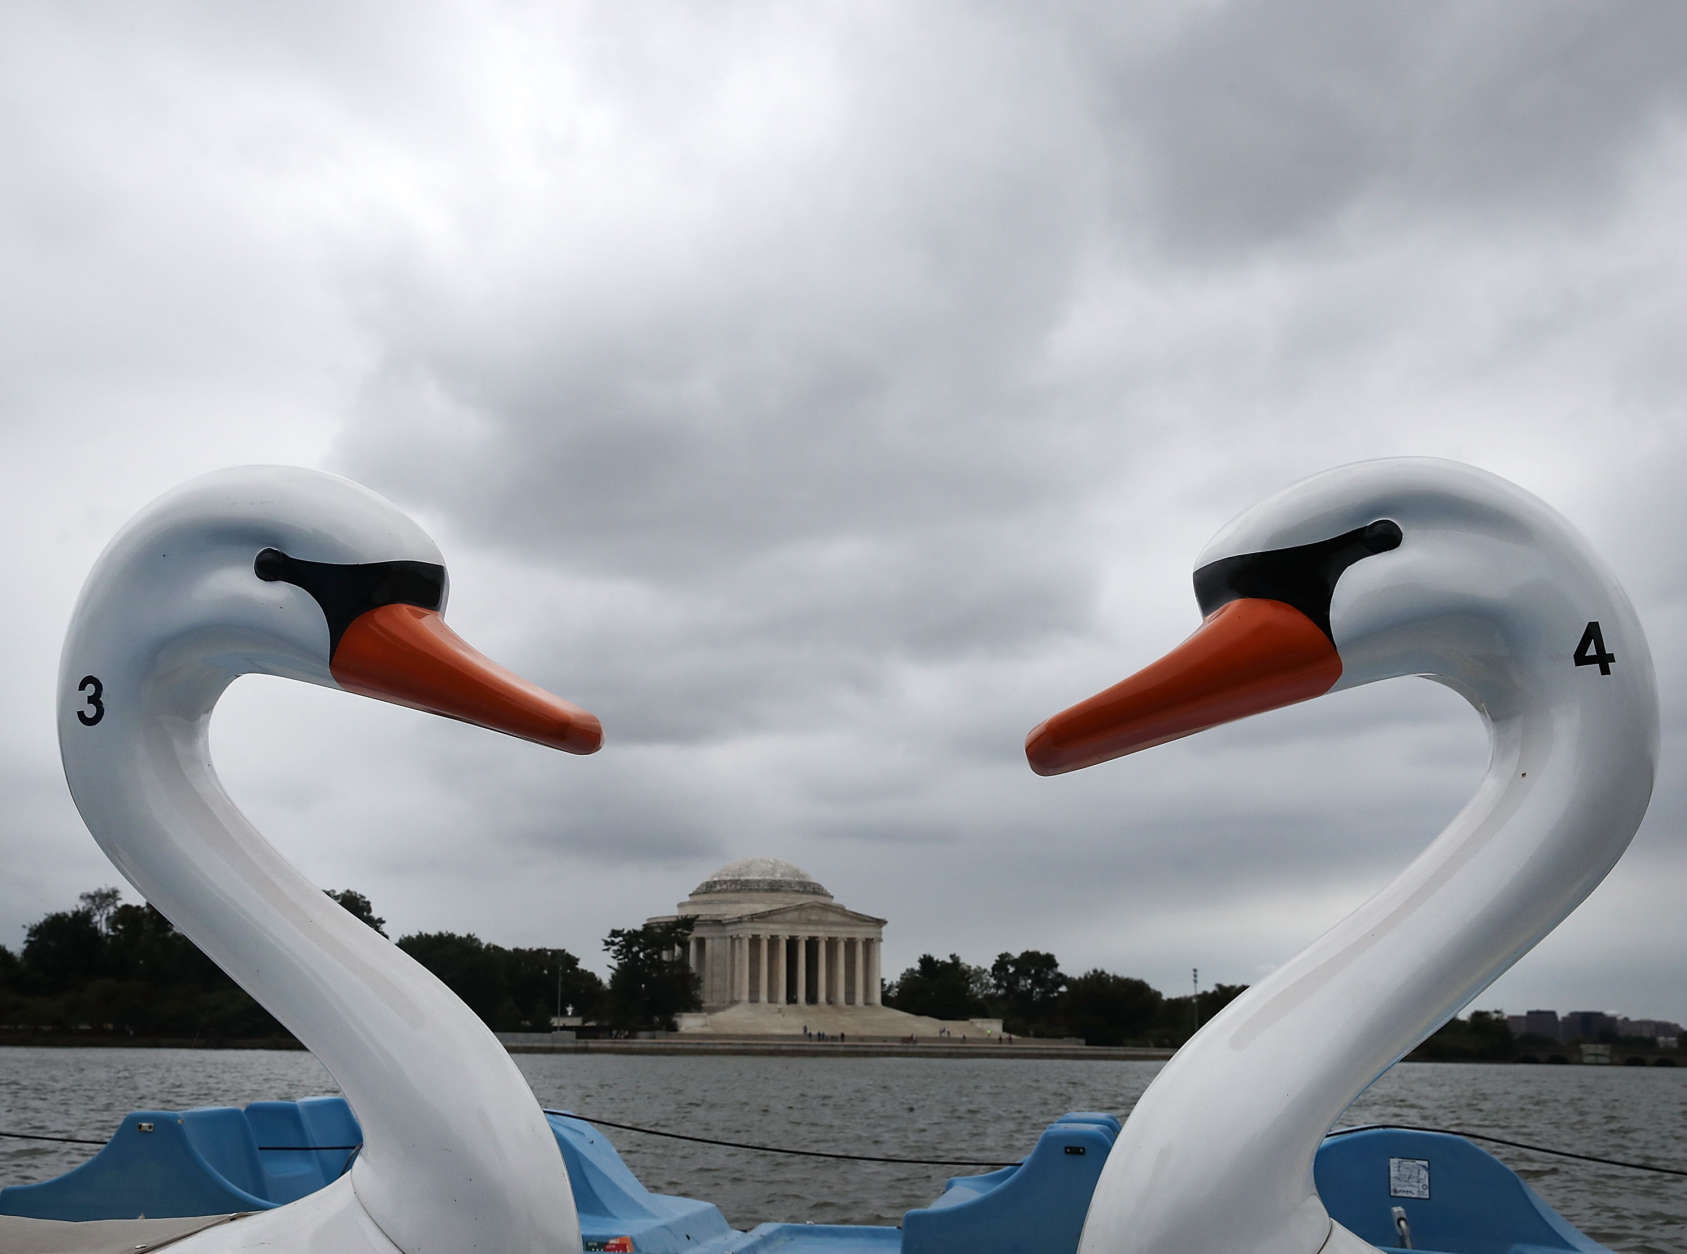 WASHINGTON, DC - SEPTEMBER 26: Paddle boat Swan's sit together on the rental dock at the Tidal Basin near the Jefferson Memorial September 26, 2016 in Washington, DC.  (Photo by Mark Wilson/Getty Images)